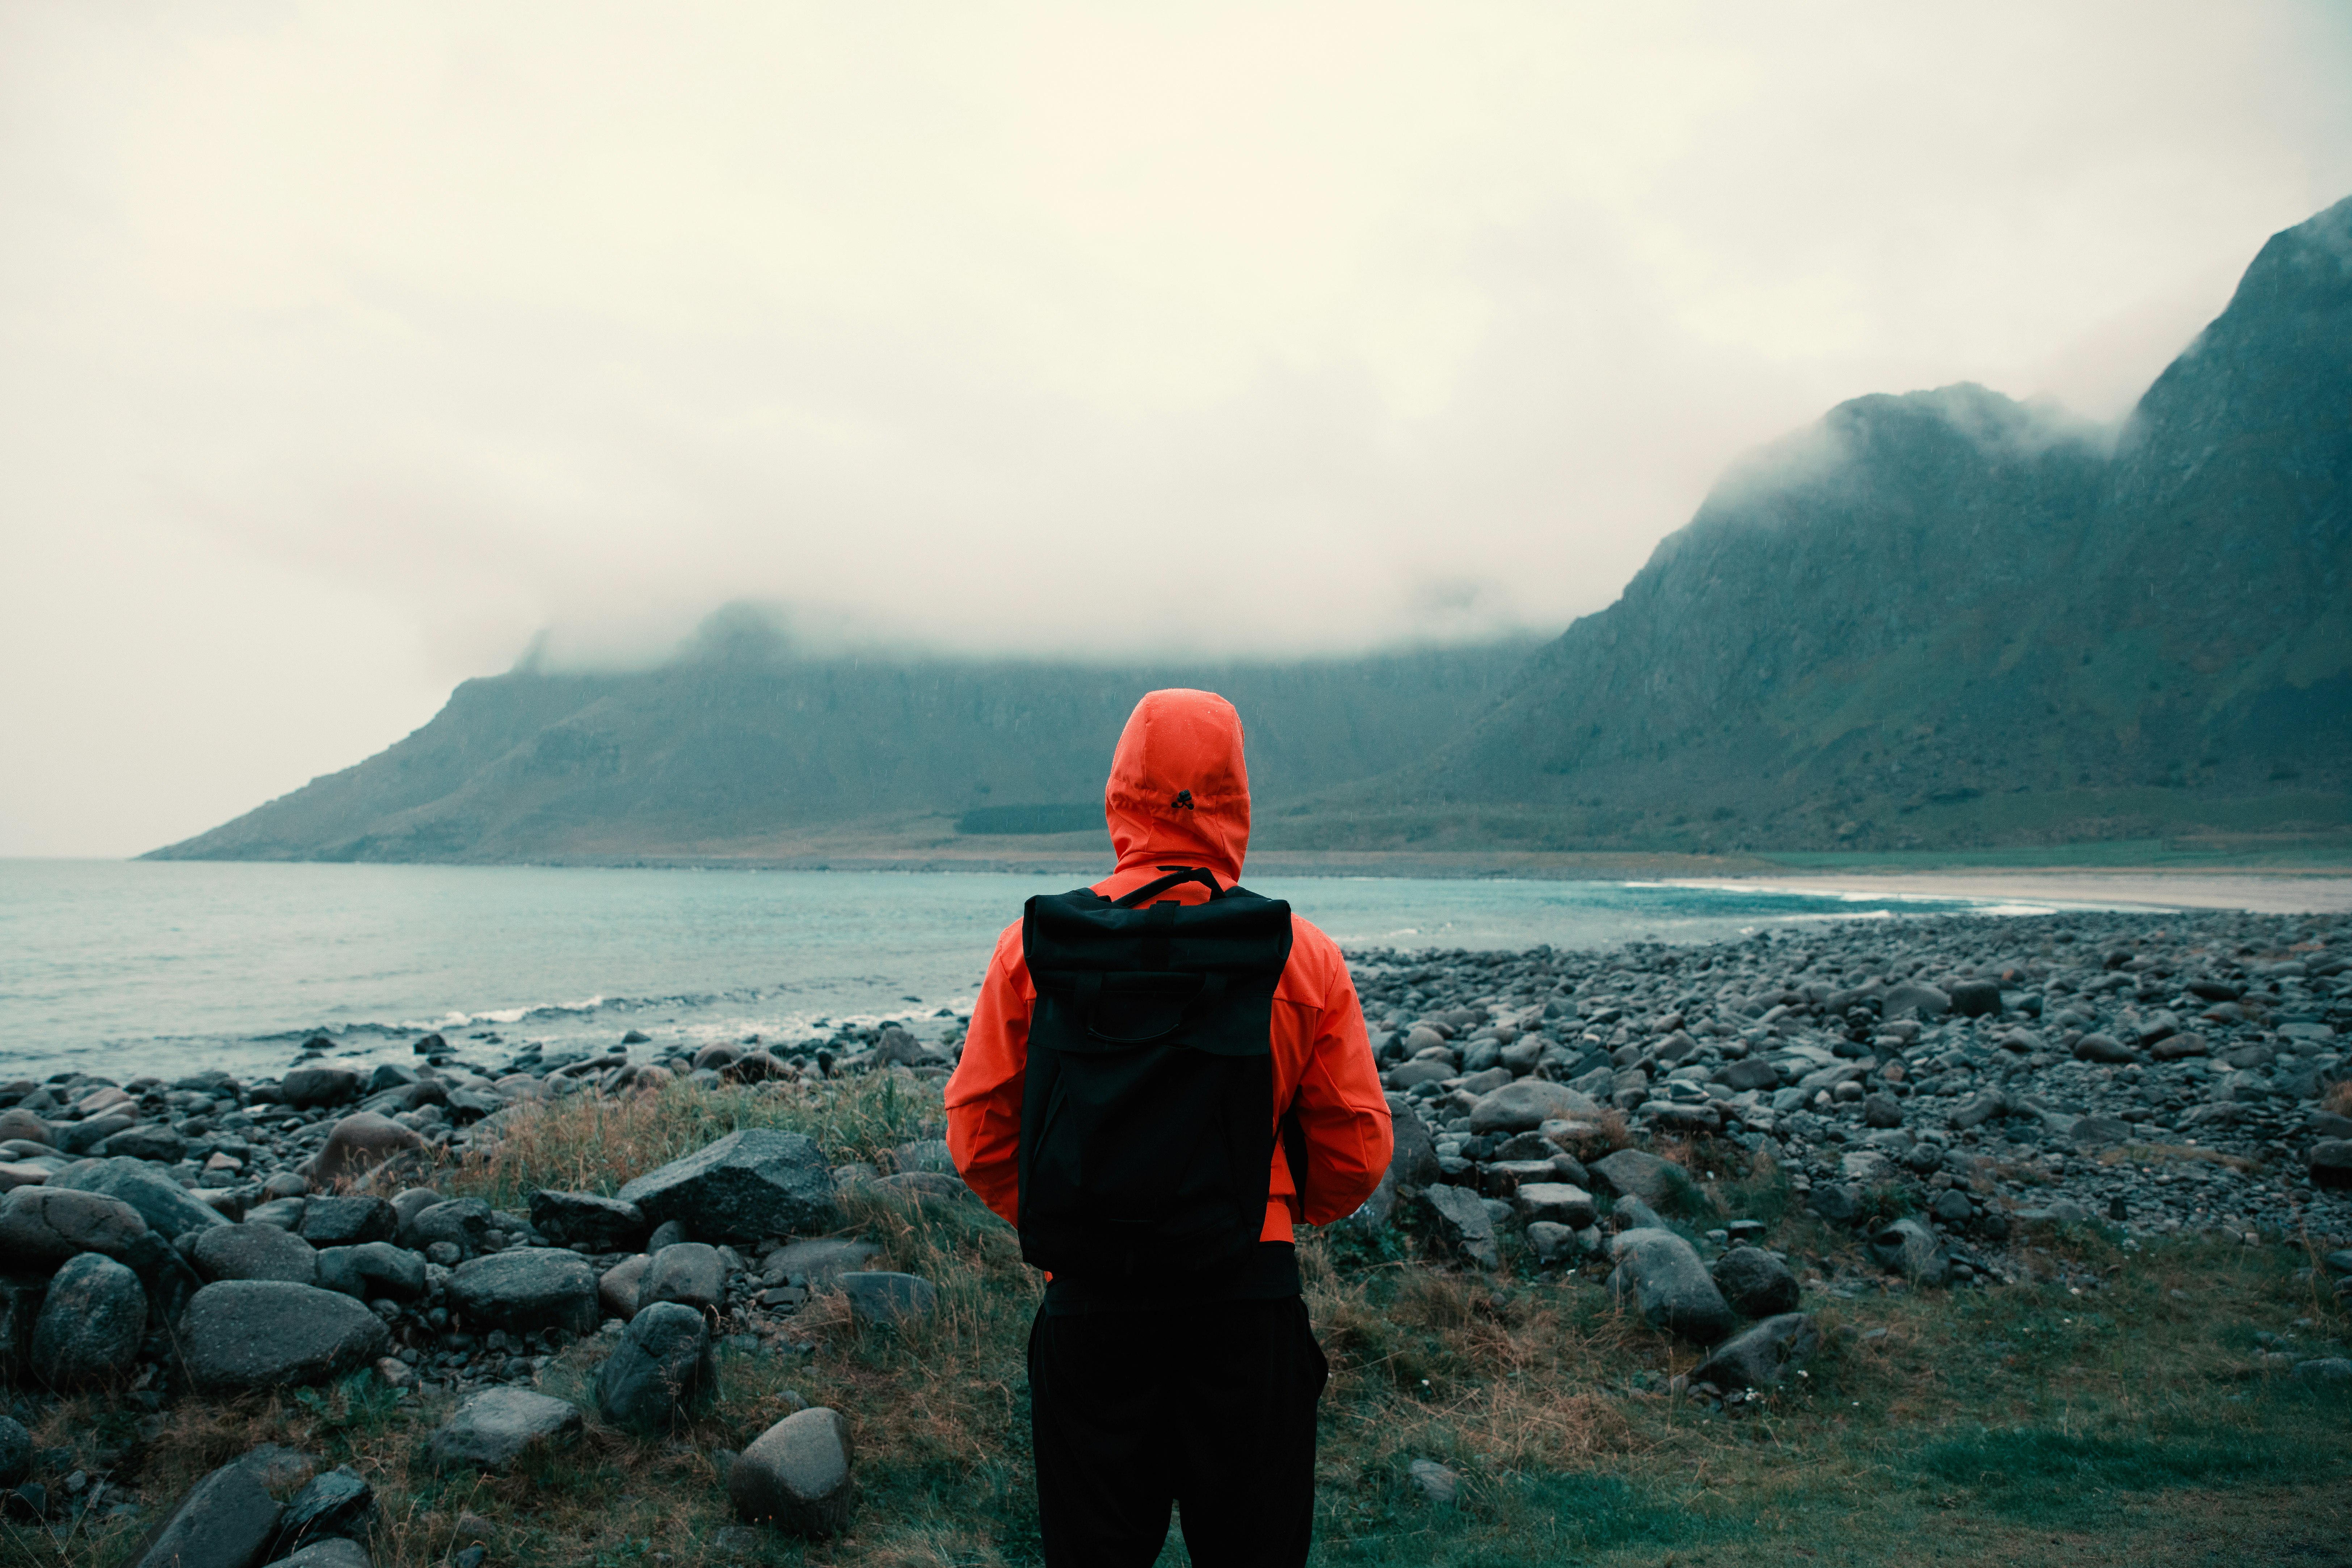 person in orange hooded jacket carrying bag looking at mountains coated with fogs